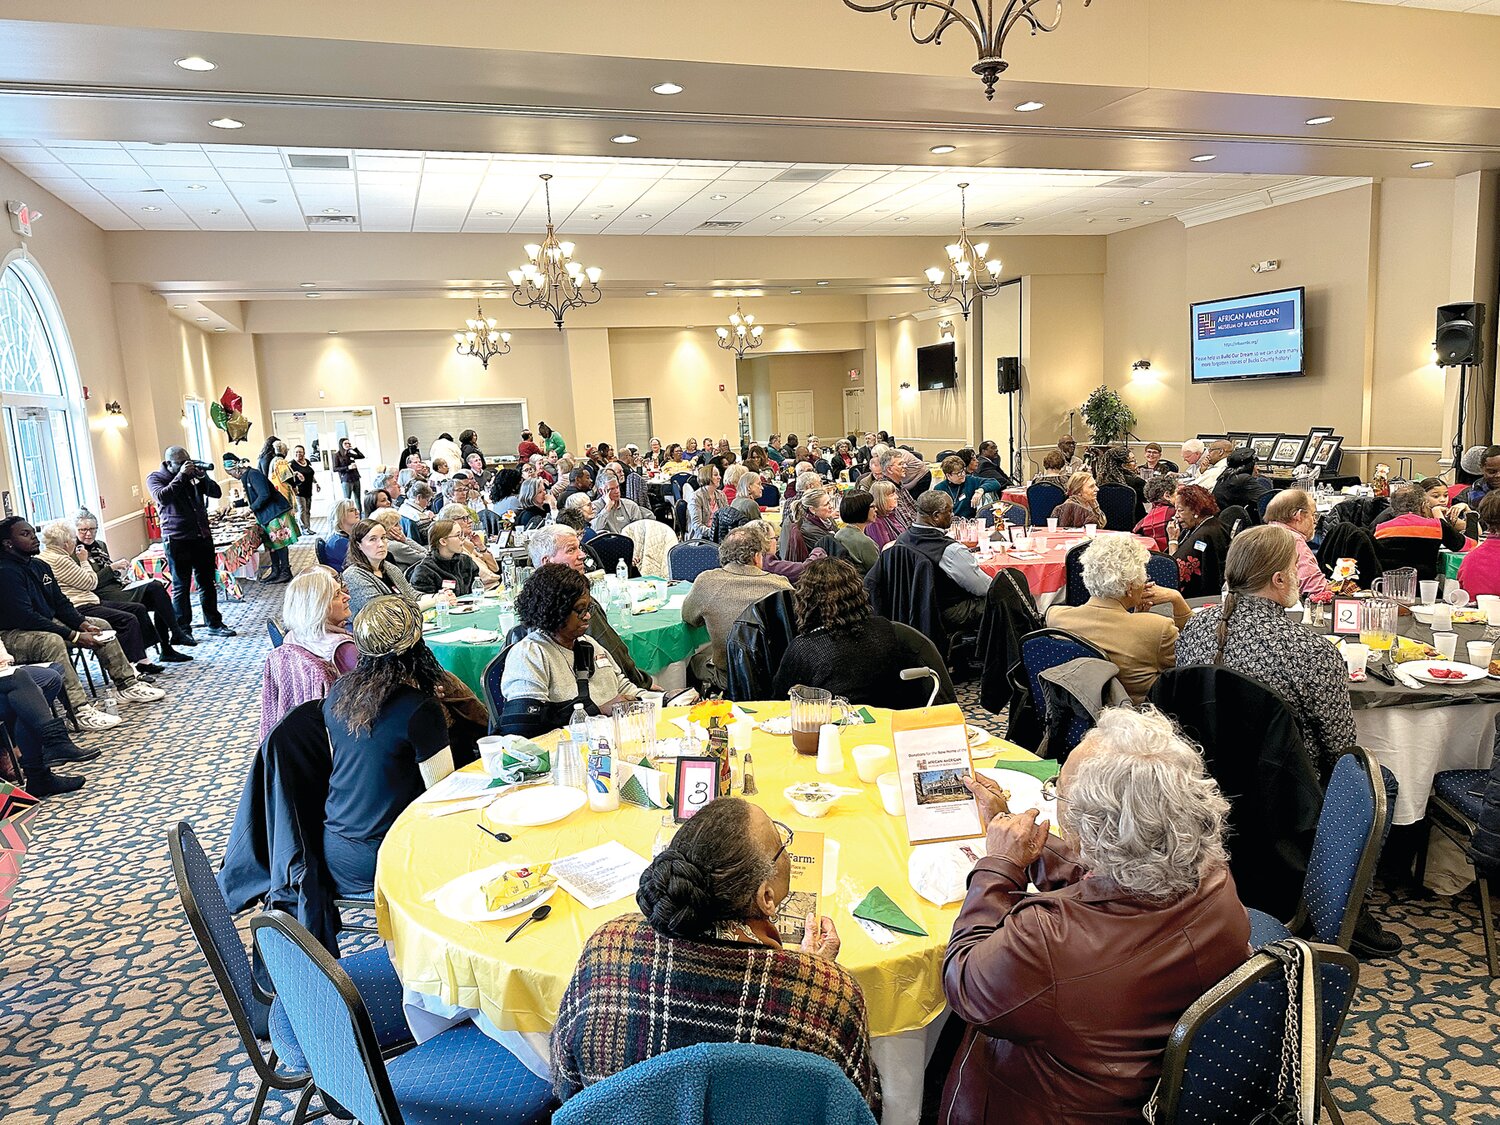 More than 150 people attend a “lunch and learn” celebrating African American History in Bucks County. The event was hosted by two local churches.